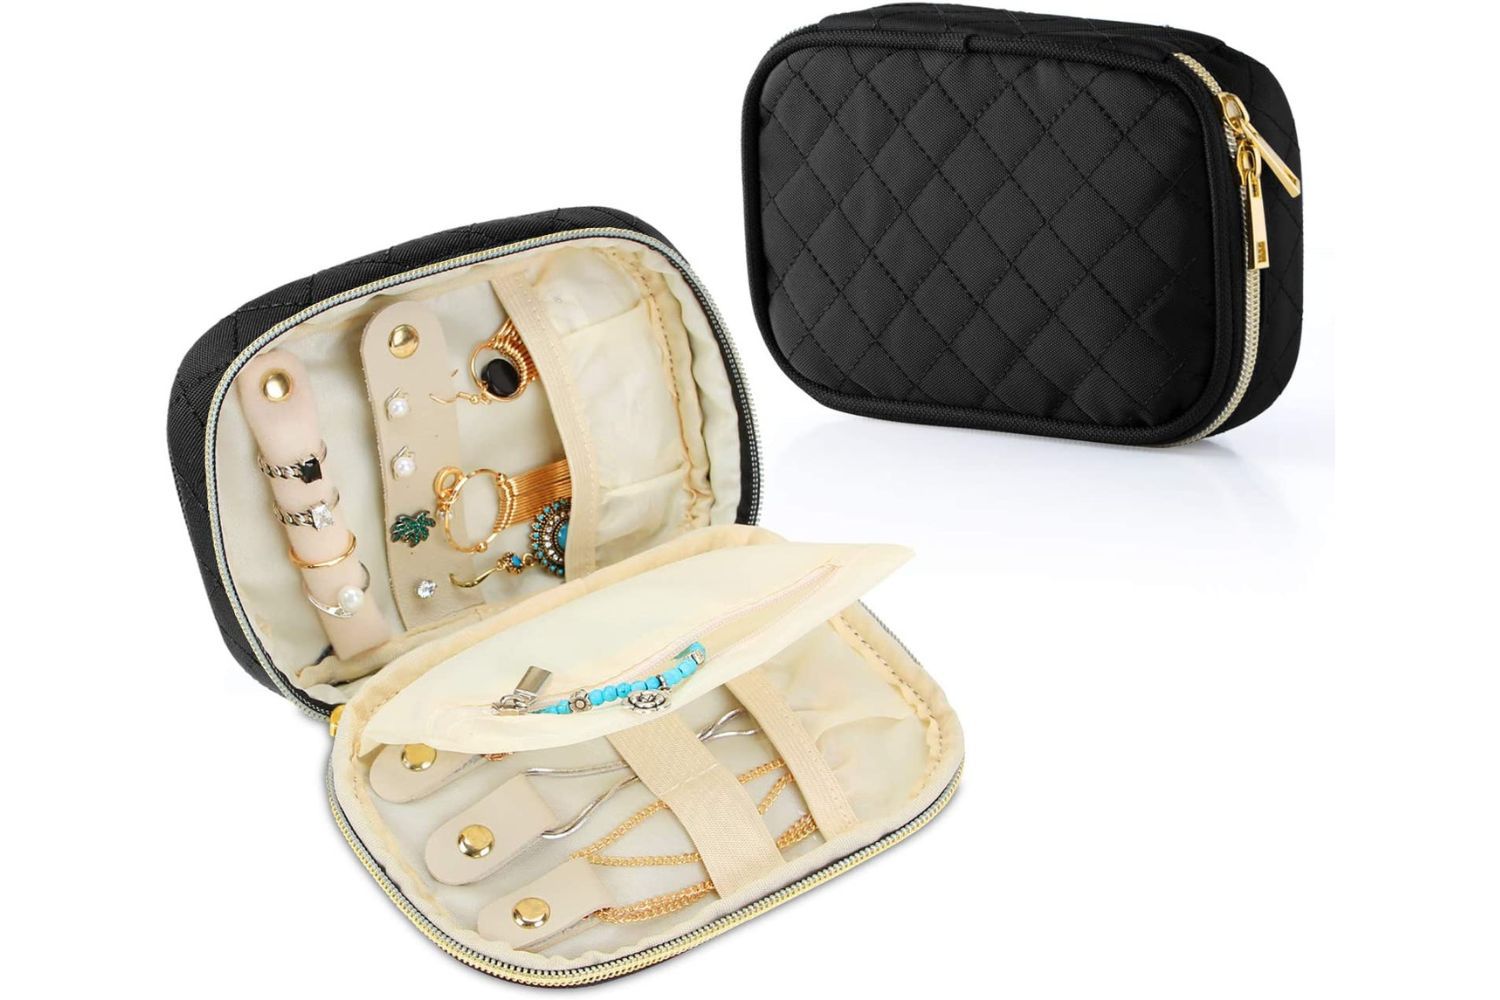 Teamoy Small Jewelry Travel Case